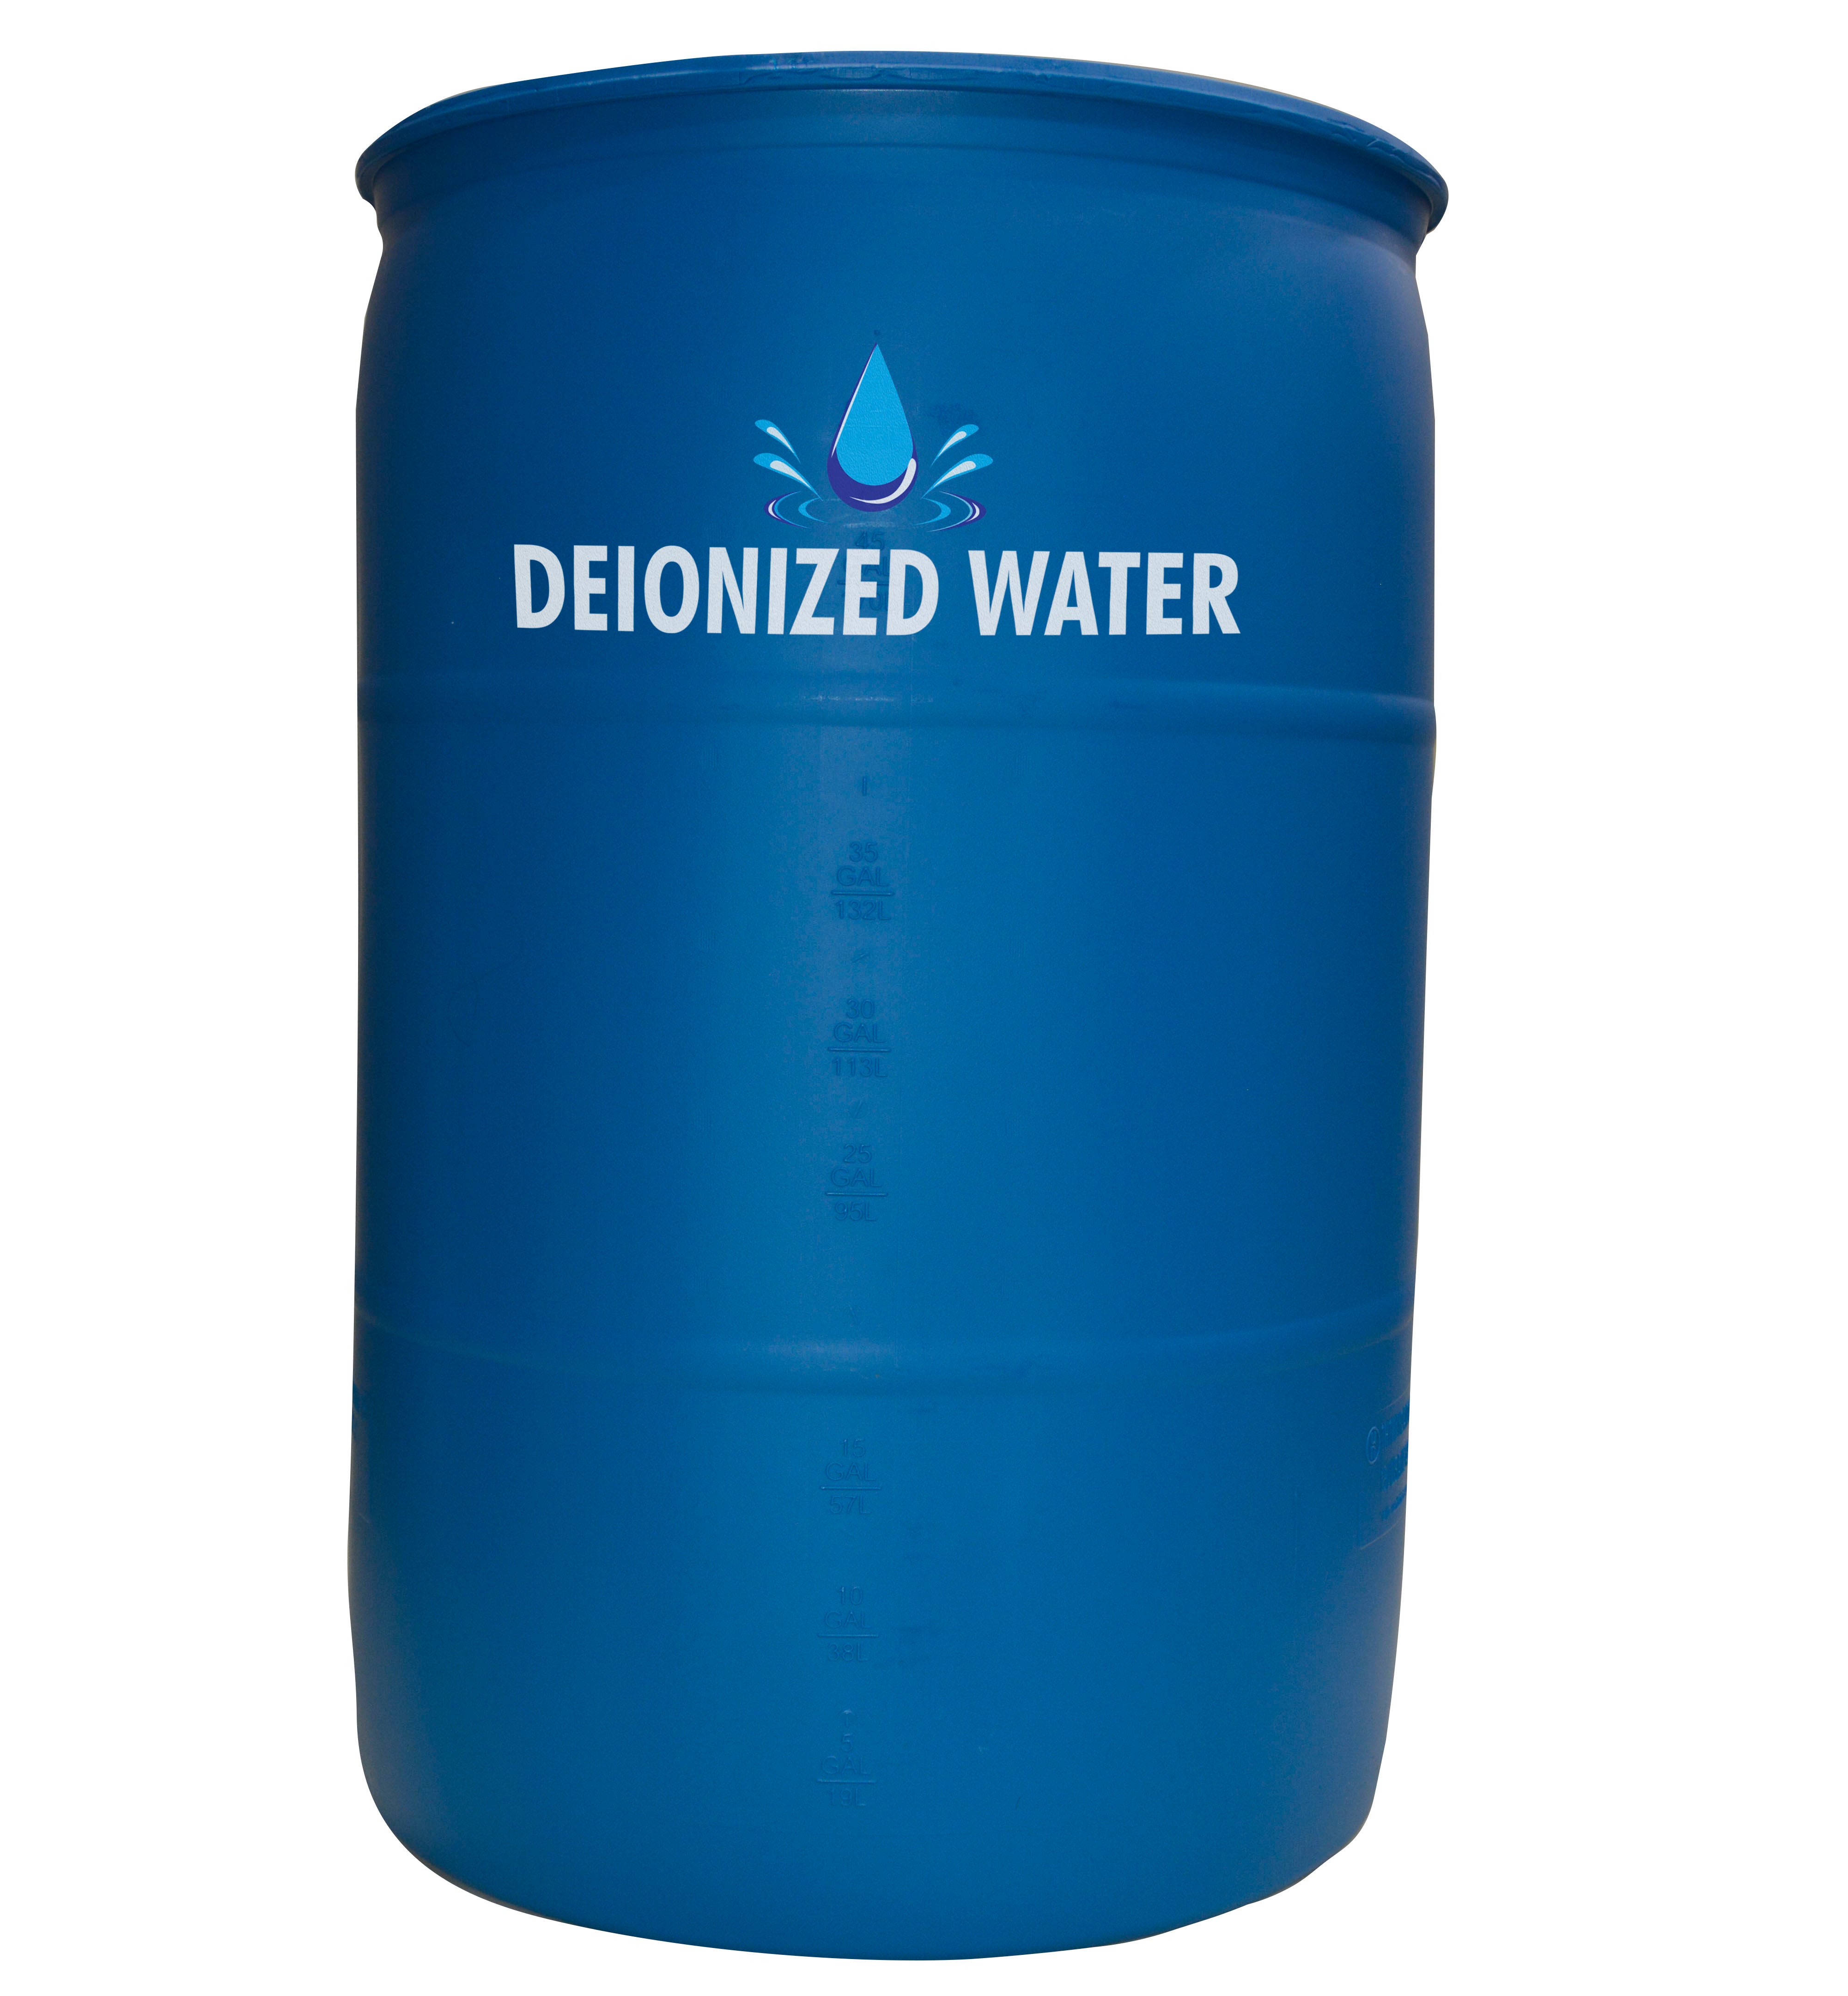 10 Uses for Deionized Water Bulk DI: Great for the Planet & your